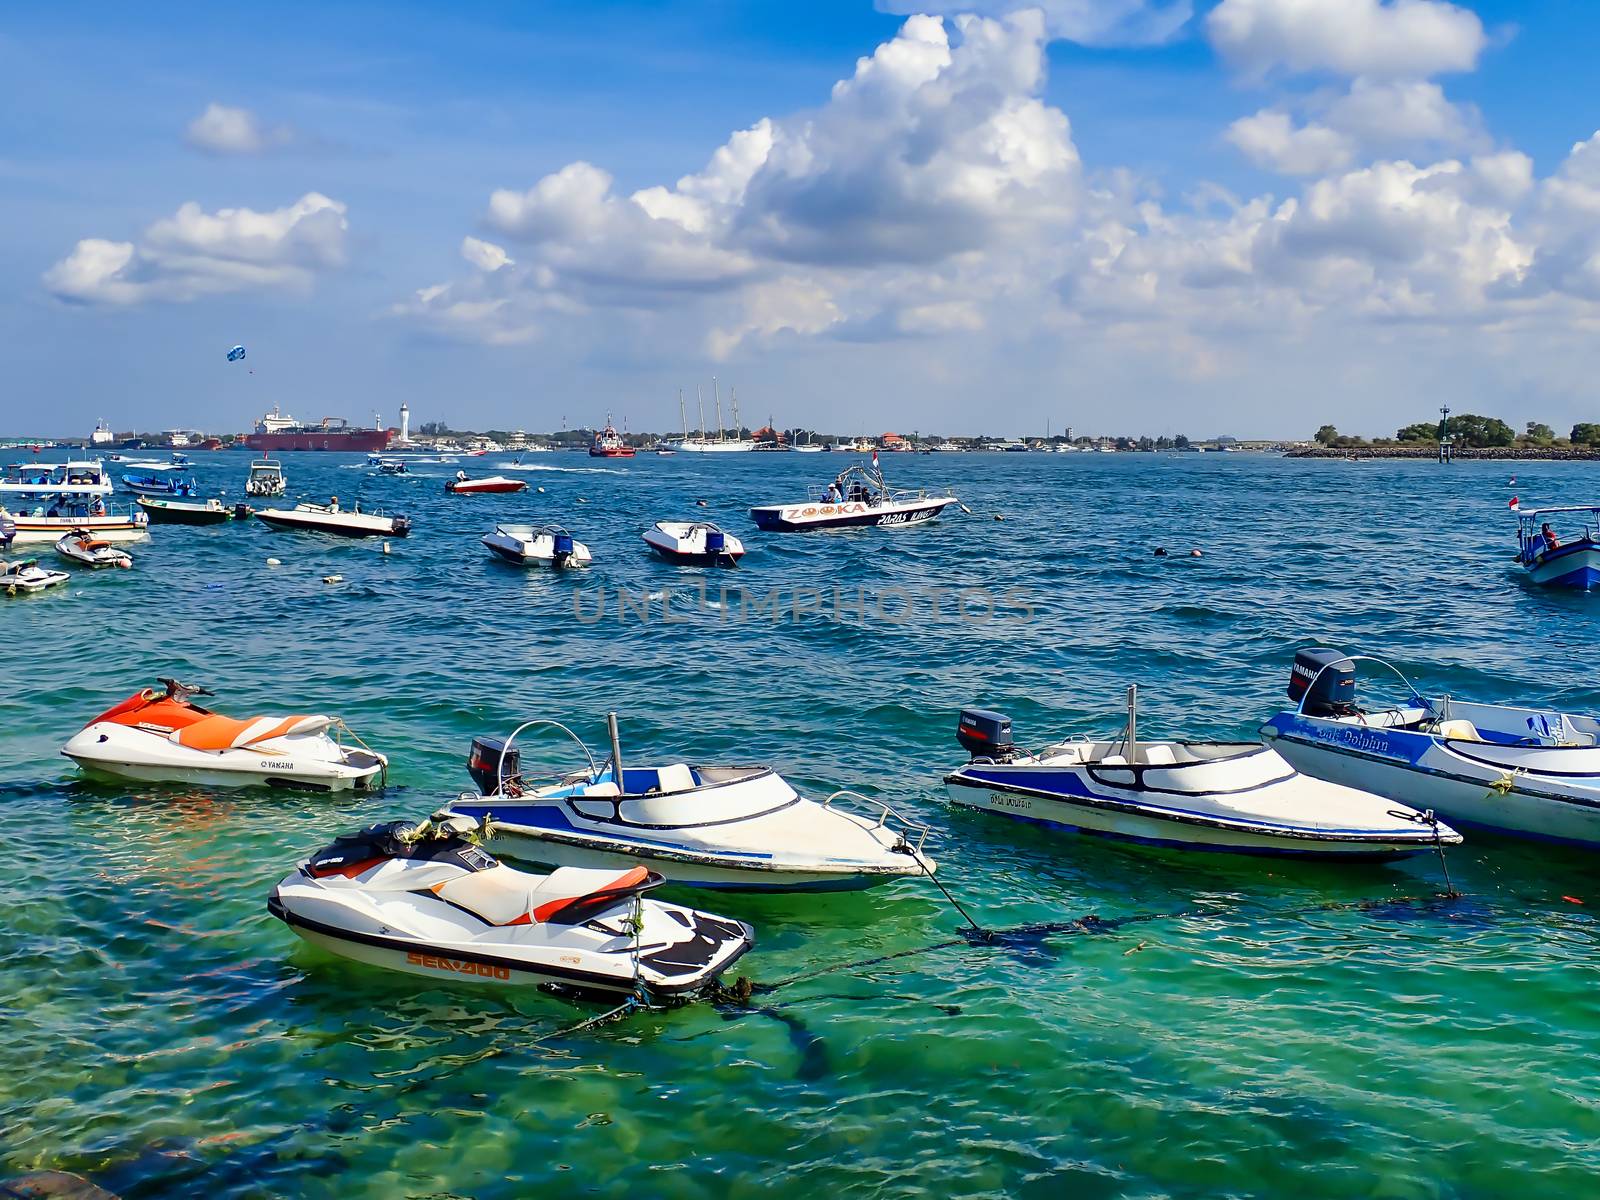 Bali, Indonesia - July 11, 2020 : Bali Water sports vehicle and tourism package in Indonesia